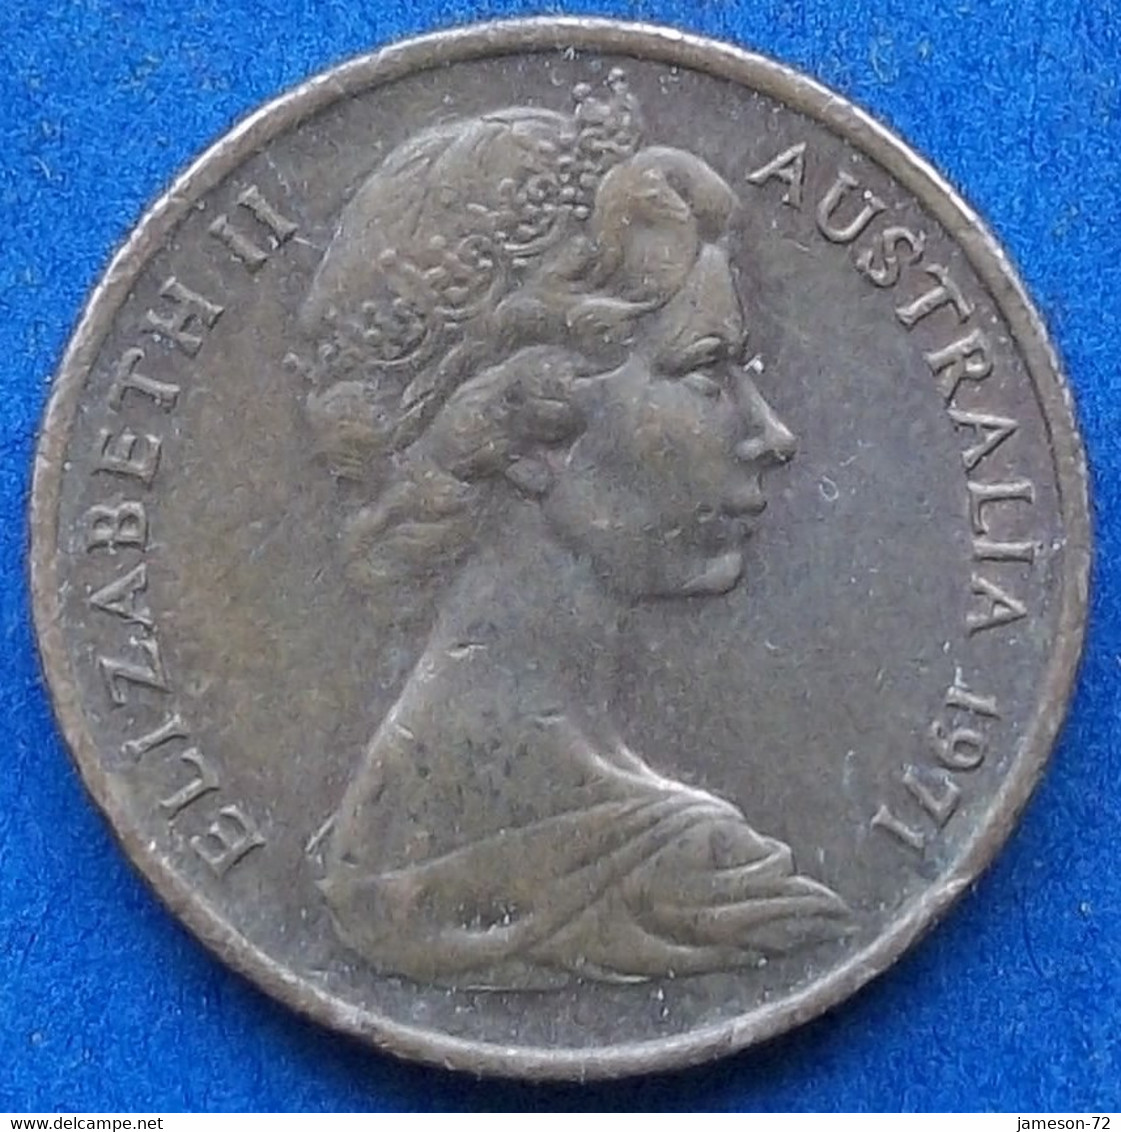 AUSTRALIA - 1 Cent 1971 "feather-tailed Glider" KM# 62 Elizabeth II Decimal Coinage (1971-2022) - Edelweiss Coins - Cent